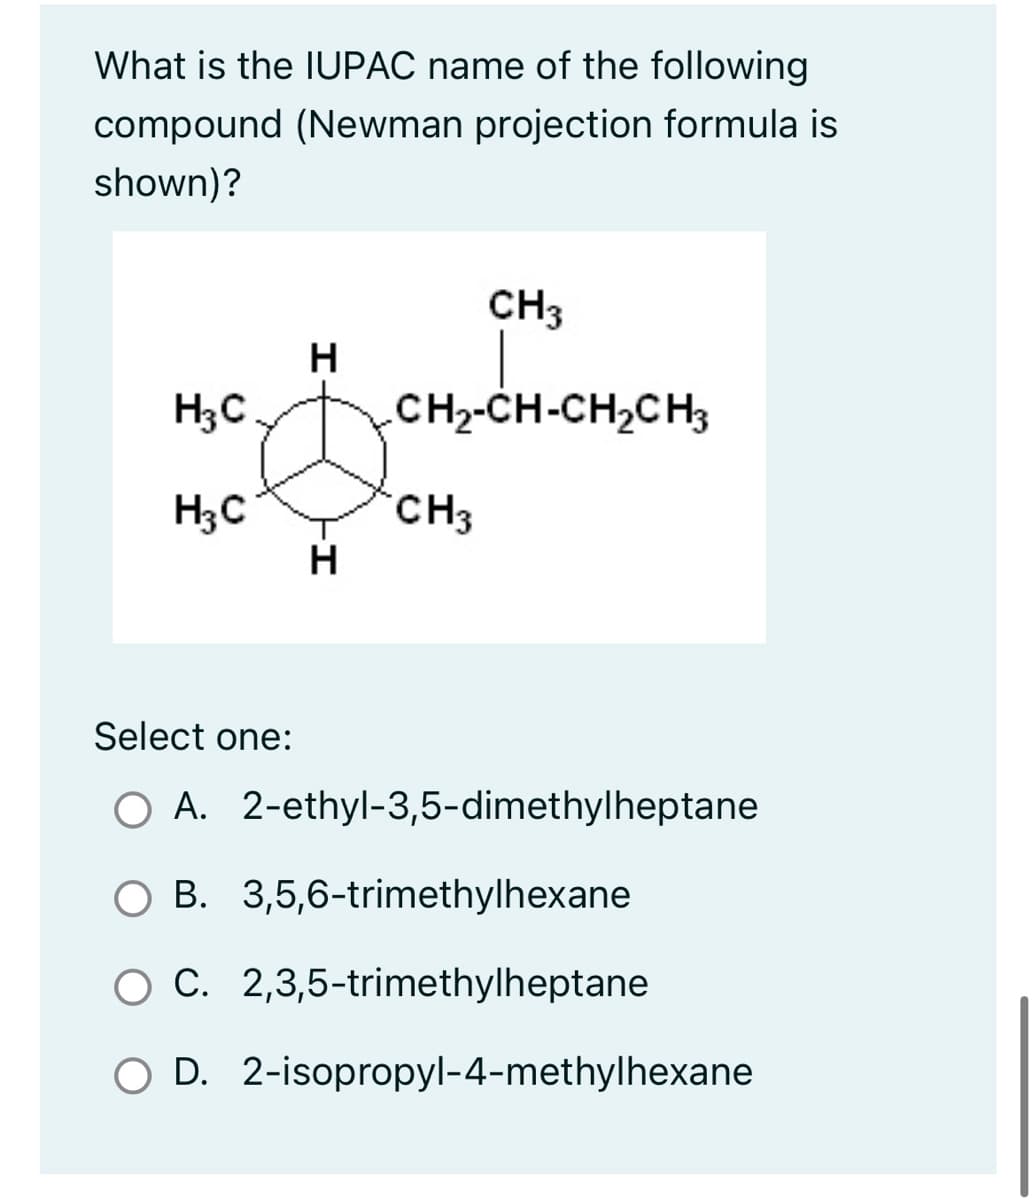 What is the IUPAC name of the following
compound (Newman projection formula is
shown)?
H₂C
H3C
H
H
CH3
CH2-CH-CH,CH
CH3
Select one:
O A. 2-ethyl-3,5-dimethylheptane
B. 3,5,6-trimethylhexane
O C. 2,3,5-trimethylheptane
O D. 2-isopropyl-4-methylhexane